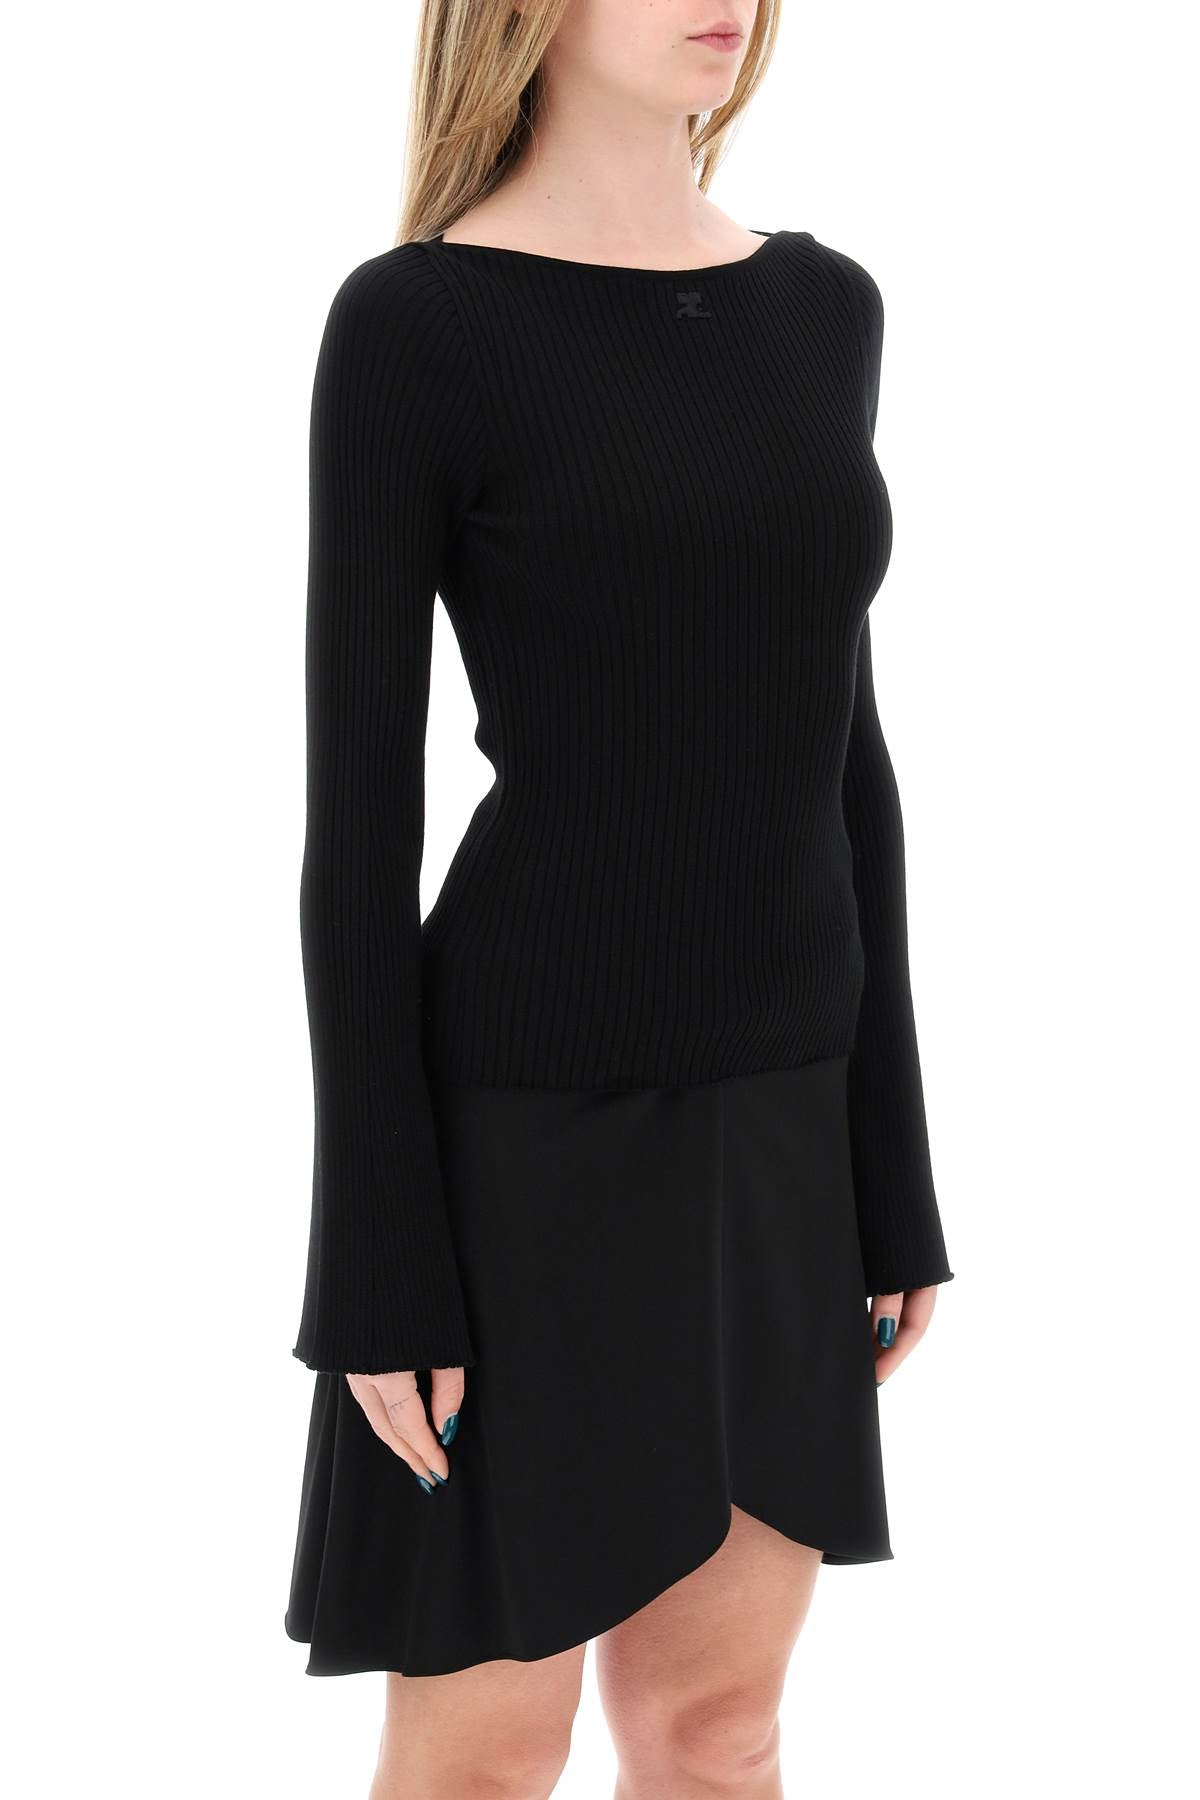 ribbed knit pullover sweater-1